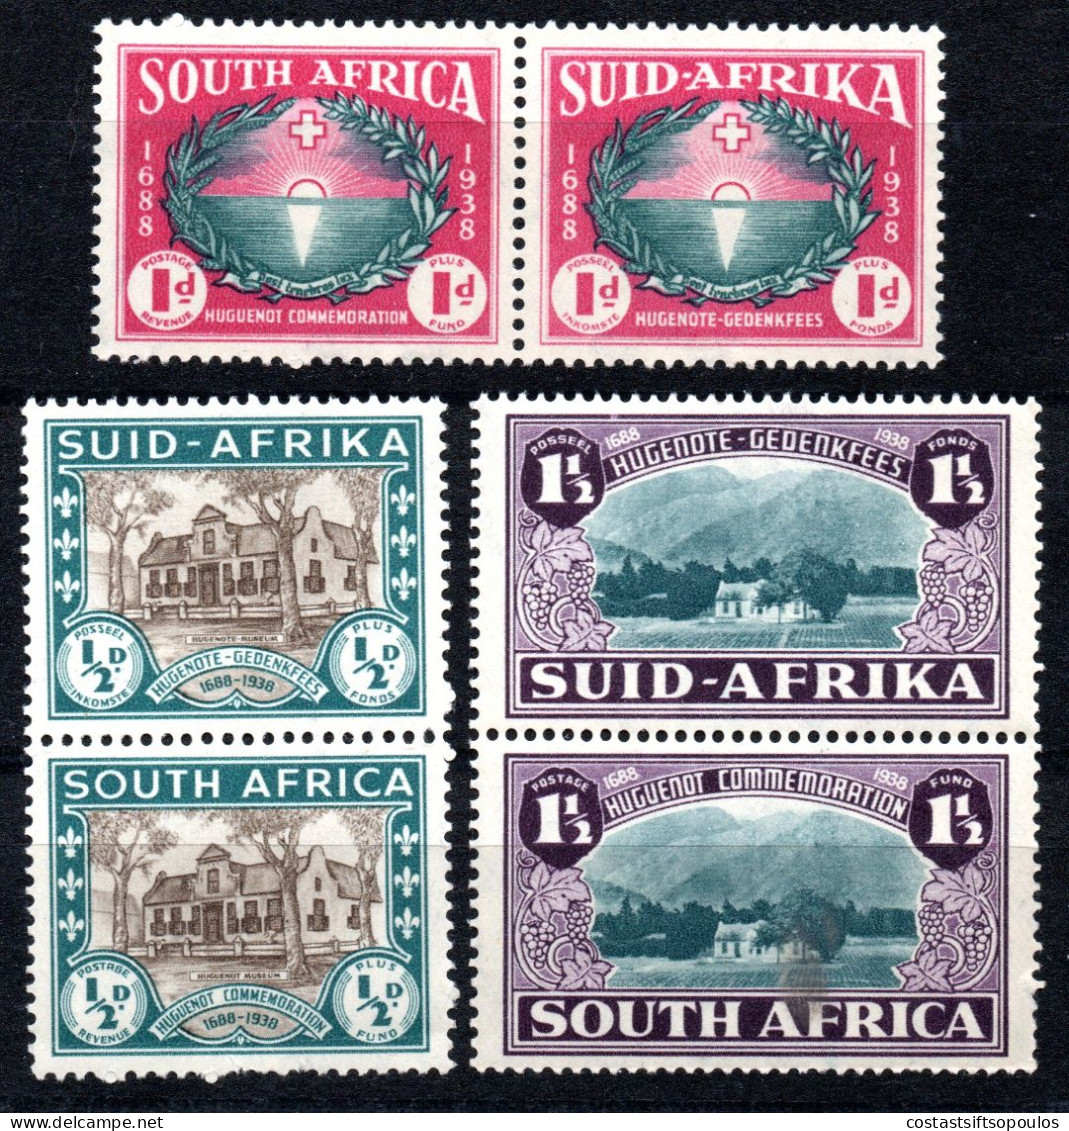 2307. SOUTH AFRICA. 1939 HUGUENOT SG. 82-84 MNH LIGHT PERF. FAULTS - Unused Stamps